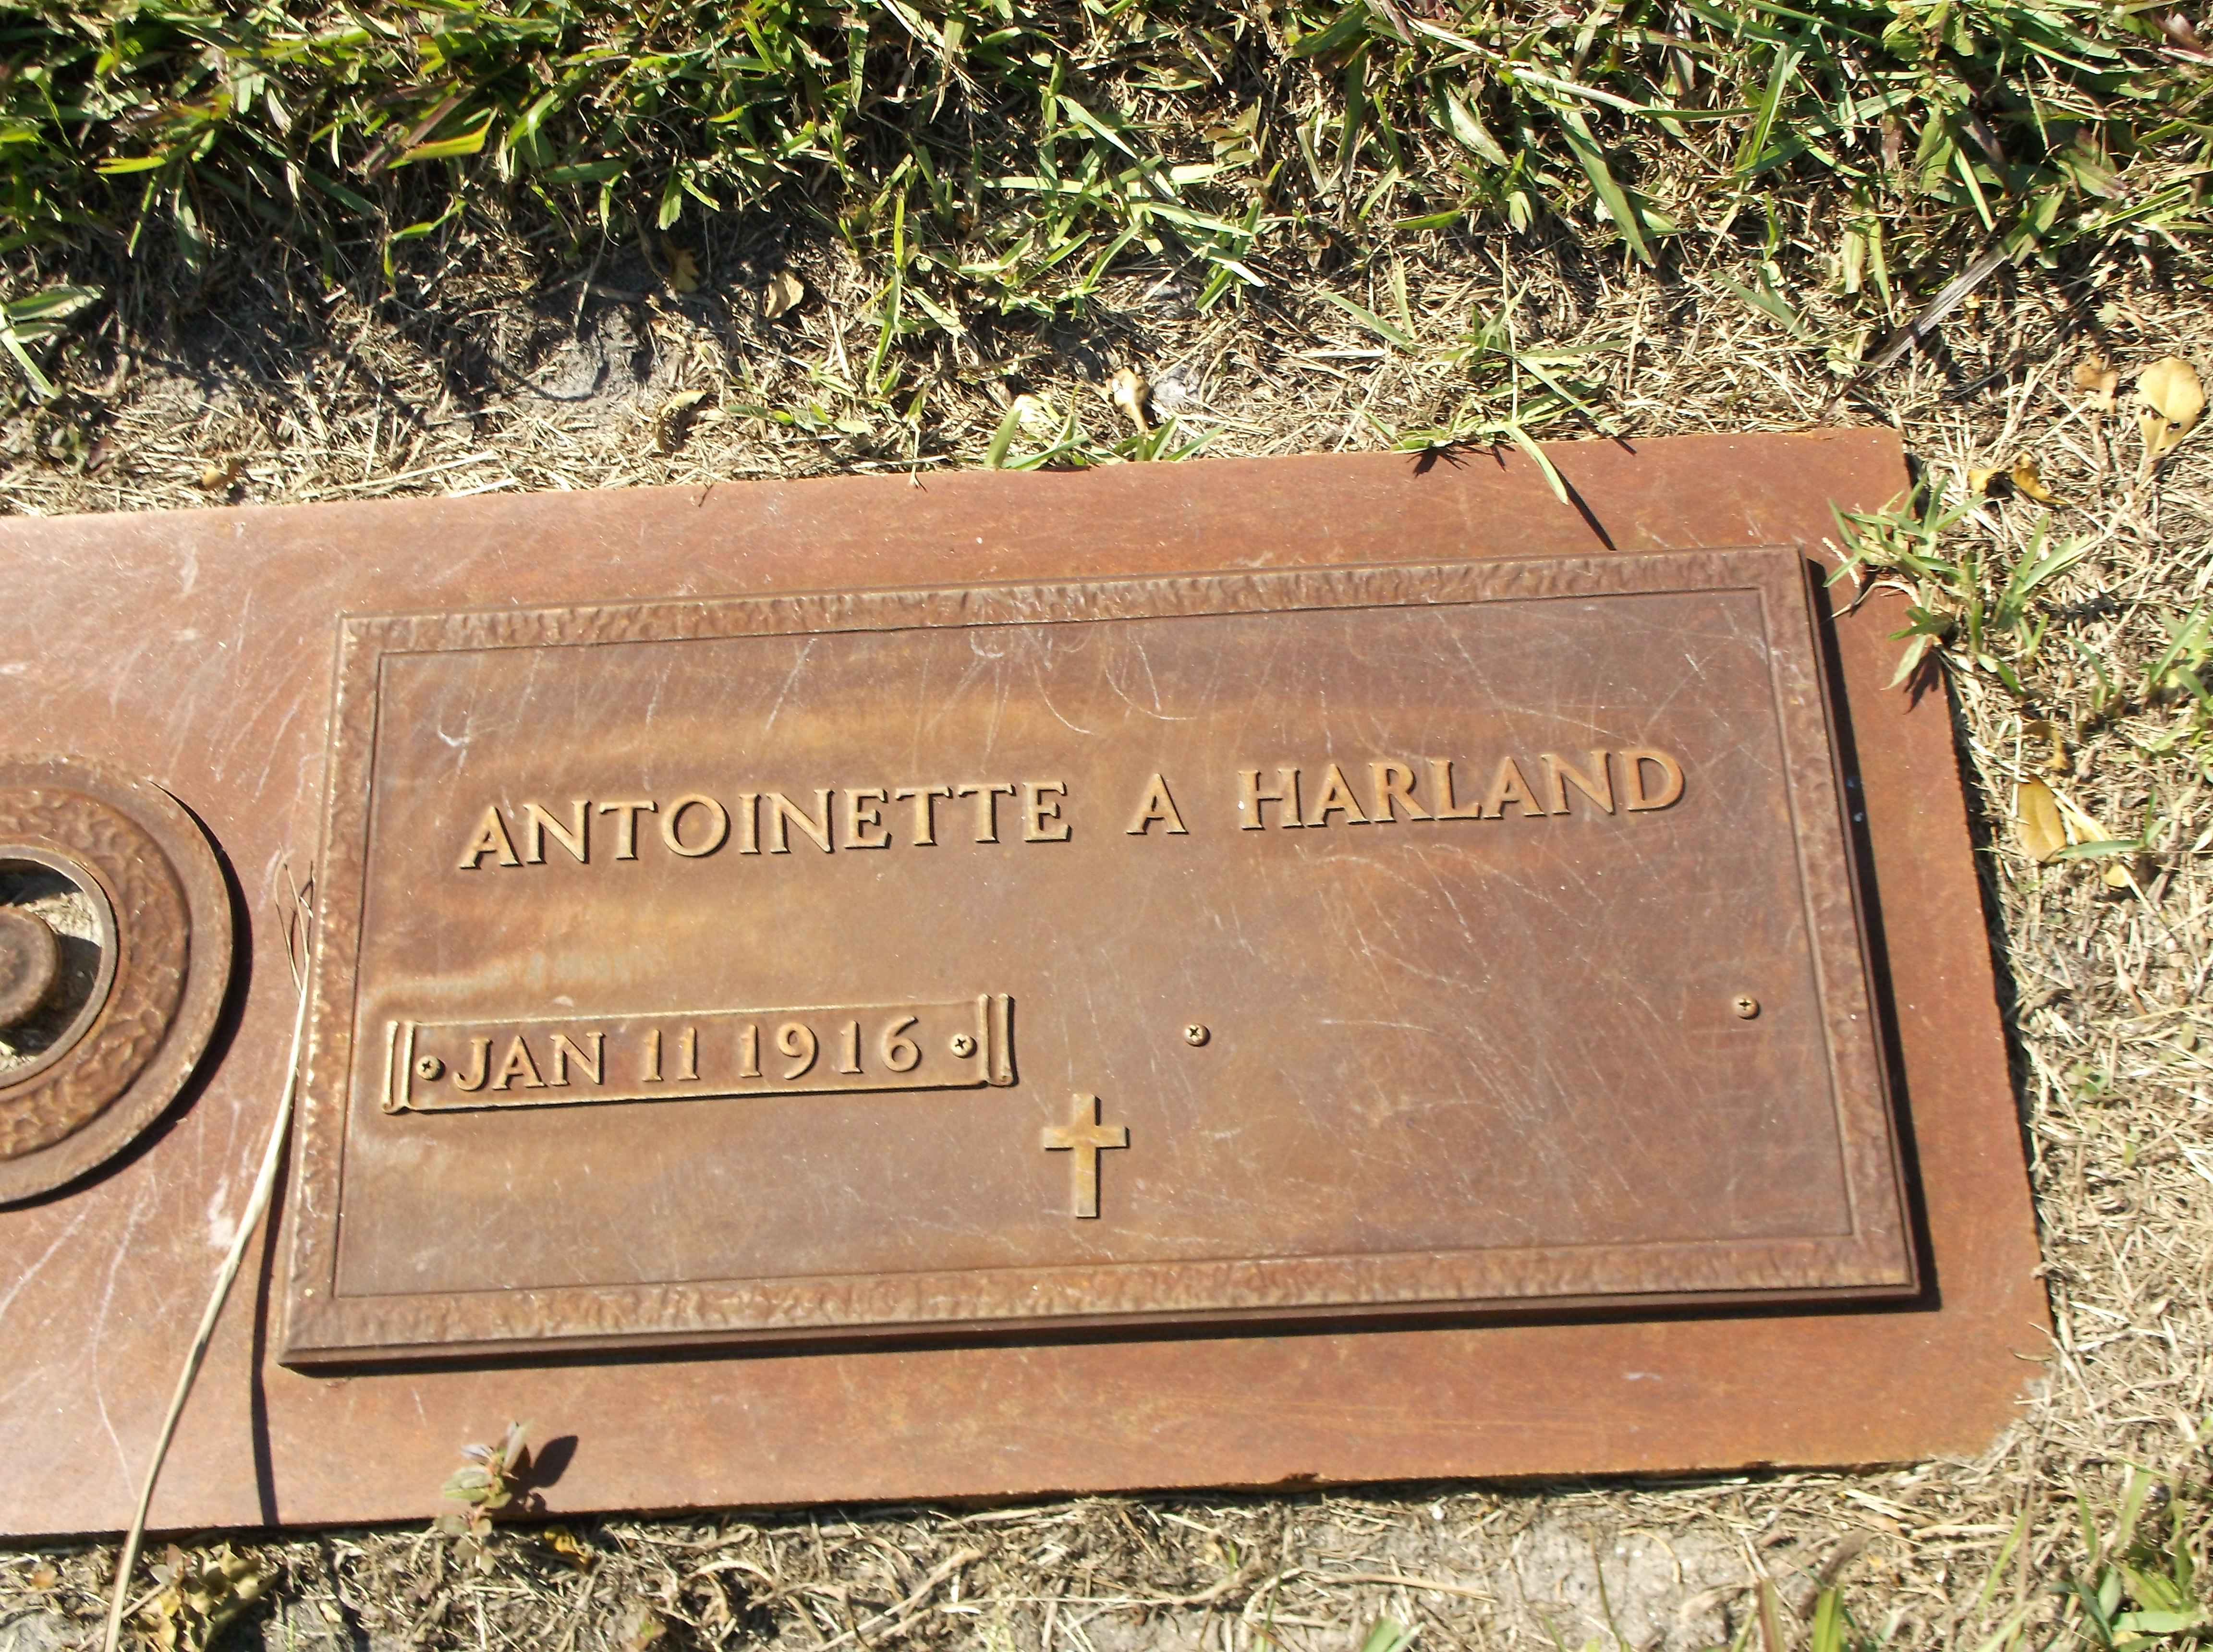 Antoinette A Harland